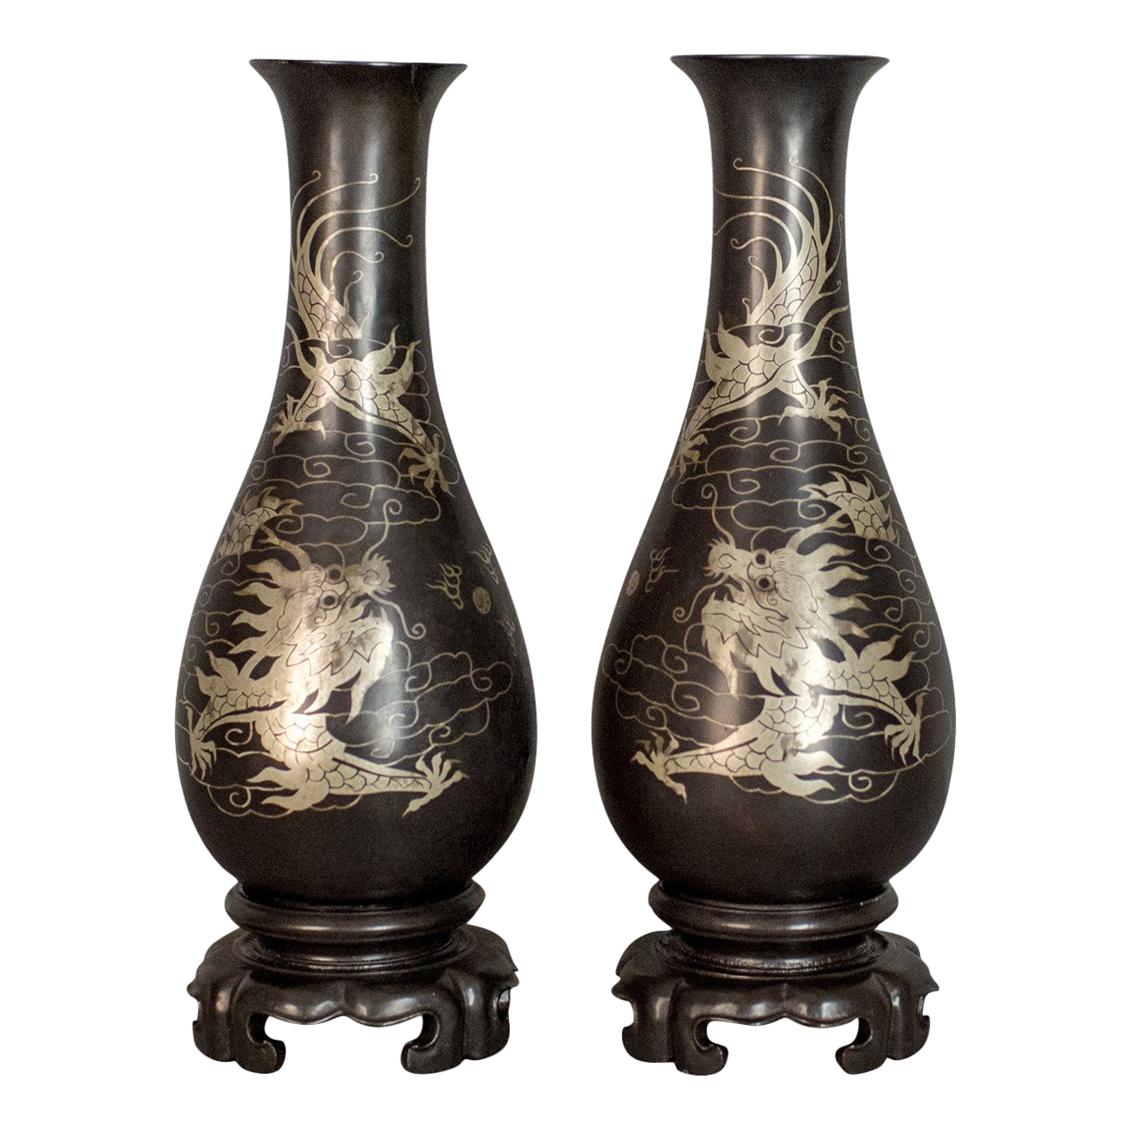 Vintage Pair of Lacquerware Vases, Chinese, 'Bodiless', Stem, Silver on Black